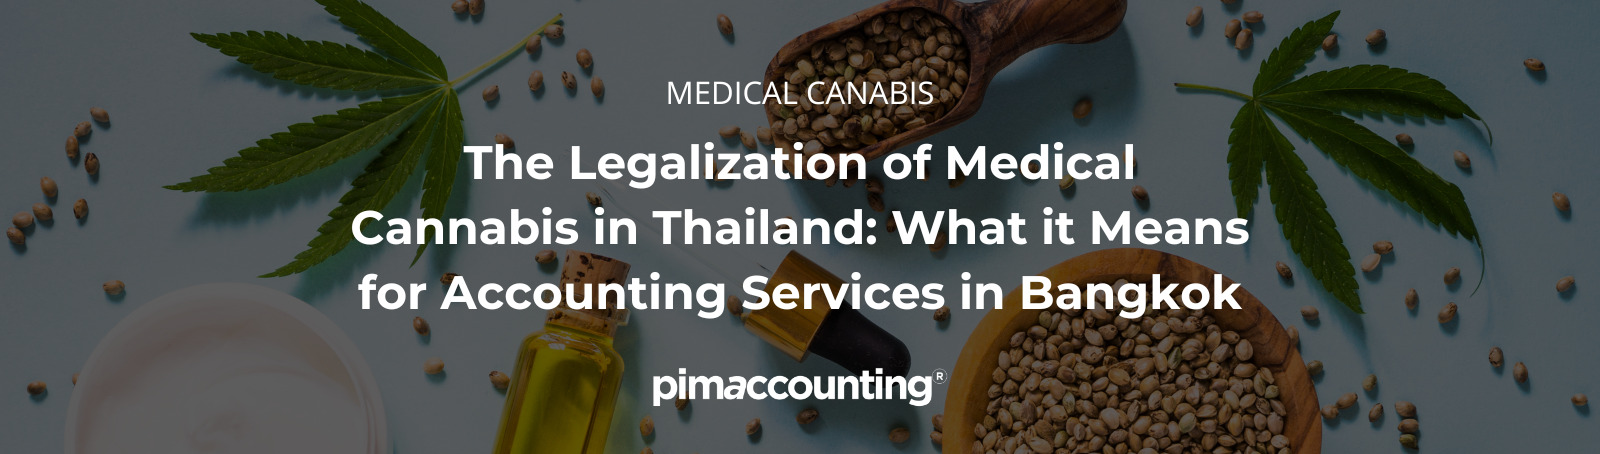 The Legalization of Medical Cannabis in Thailand: What it Means for Accounting Services in Bangkok